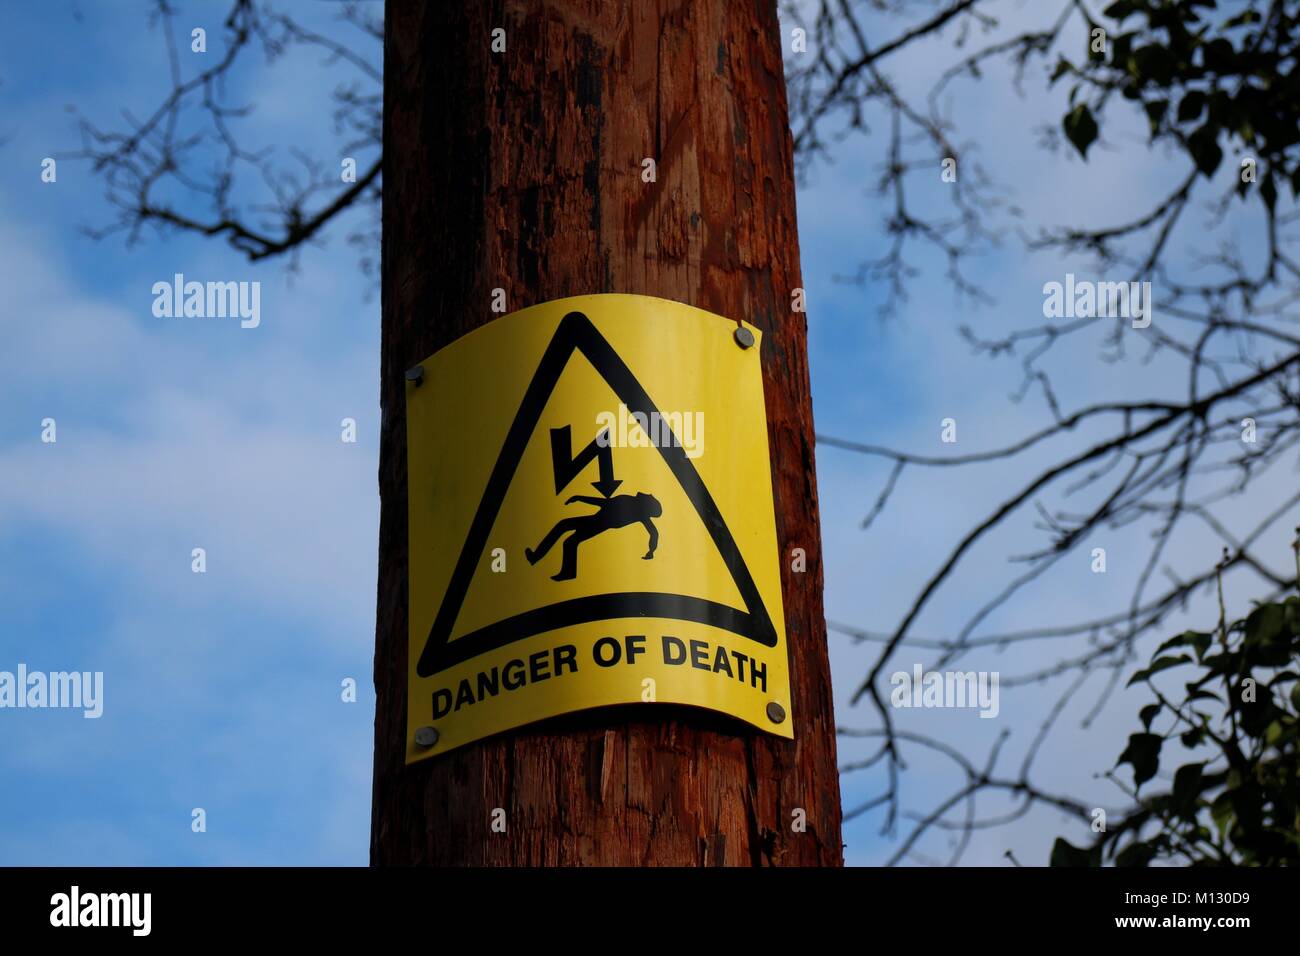 Danger of Death sign on telegraph pole Stock Photo